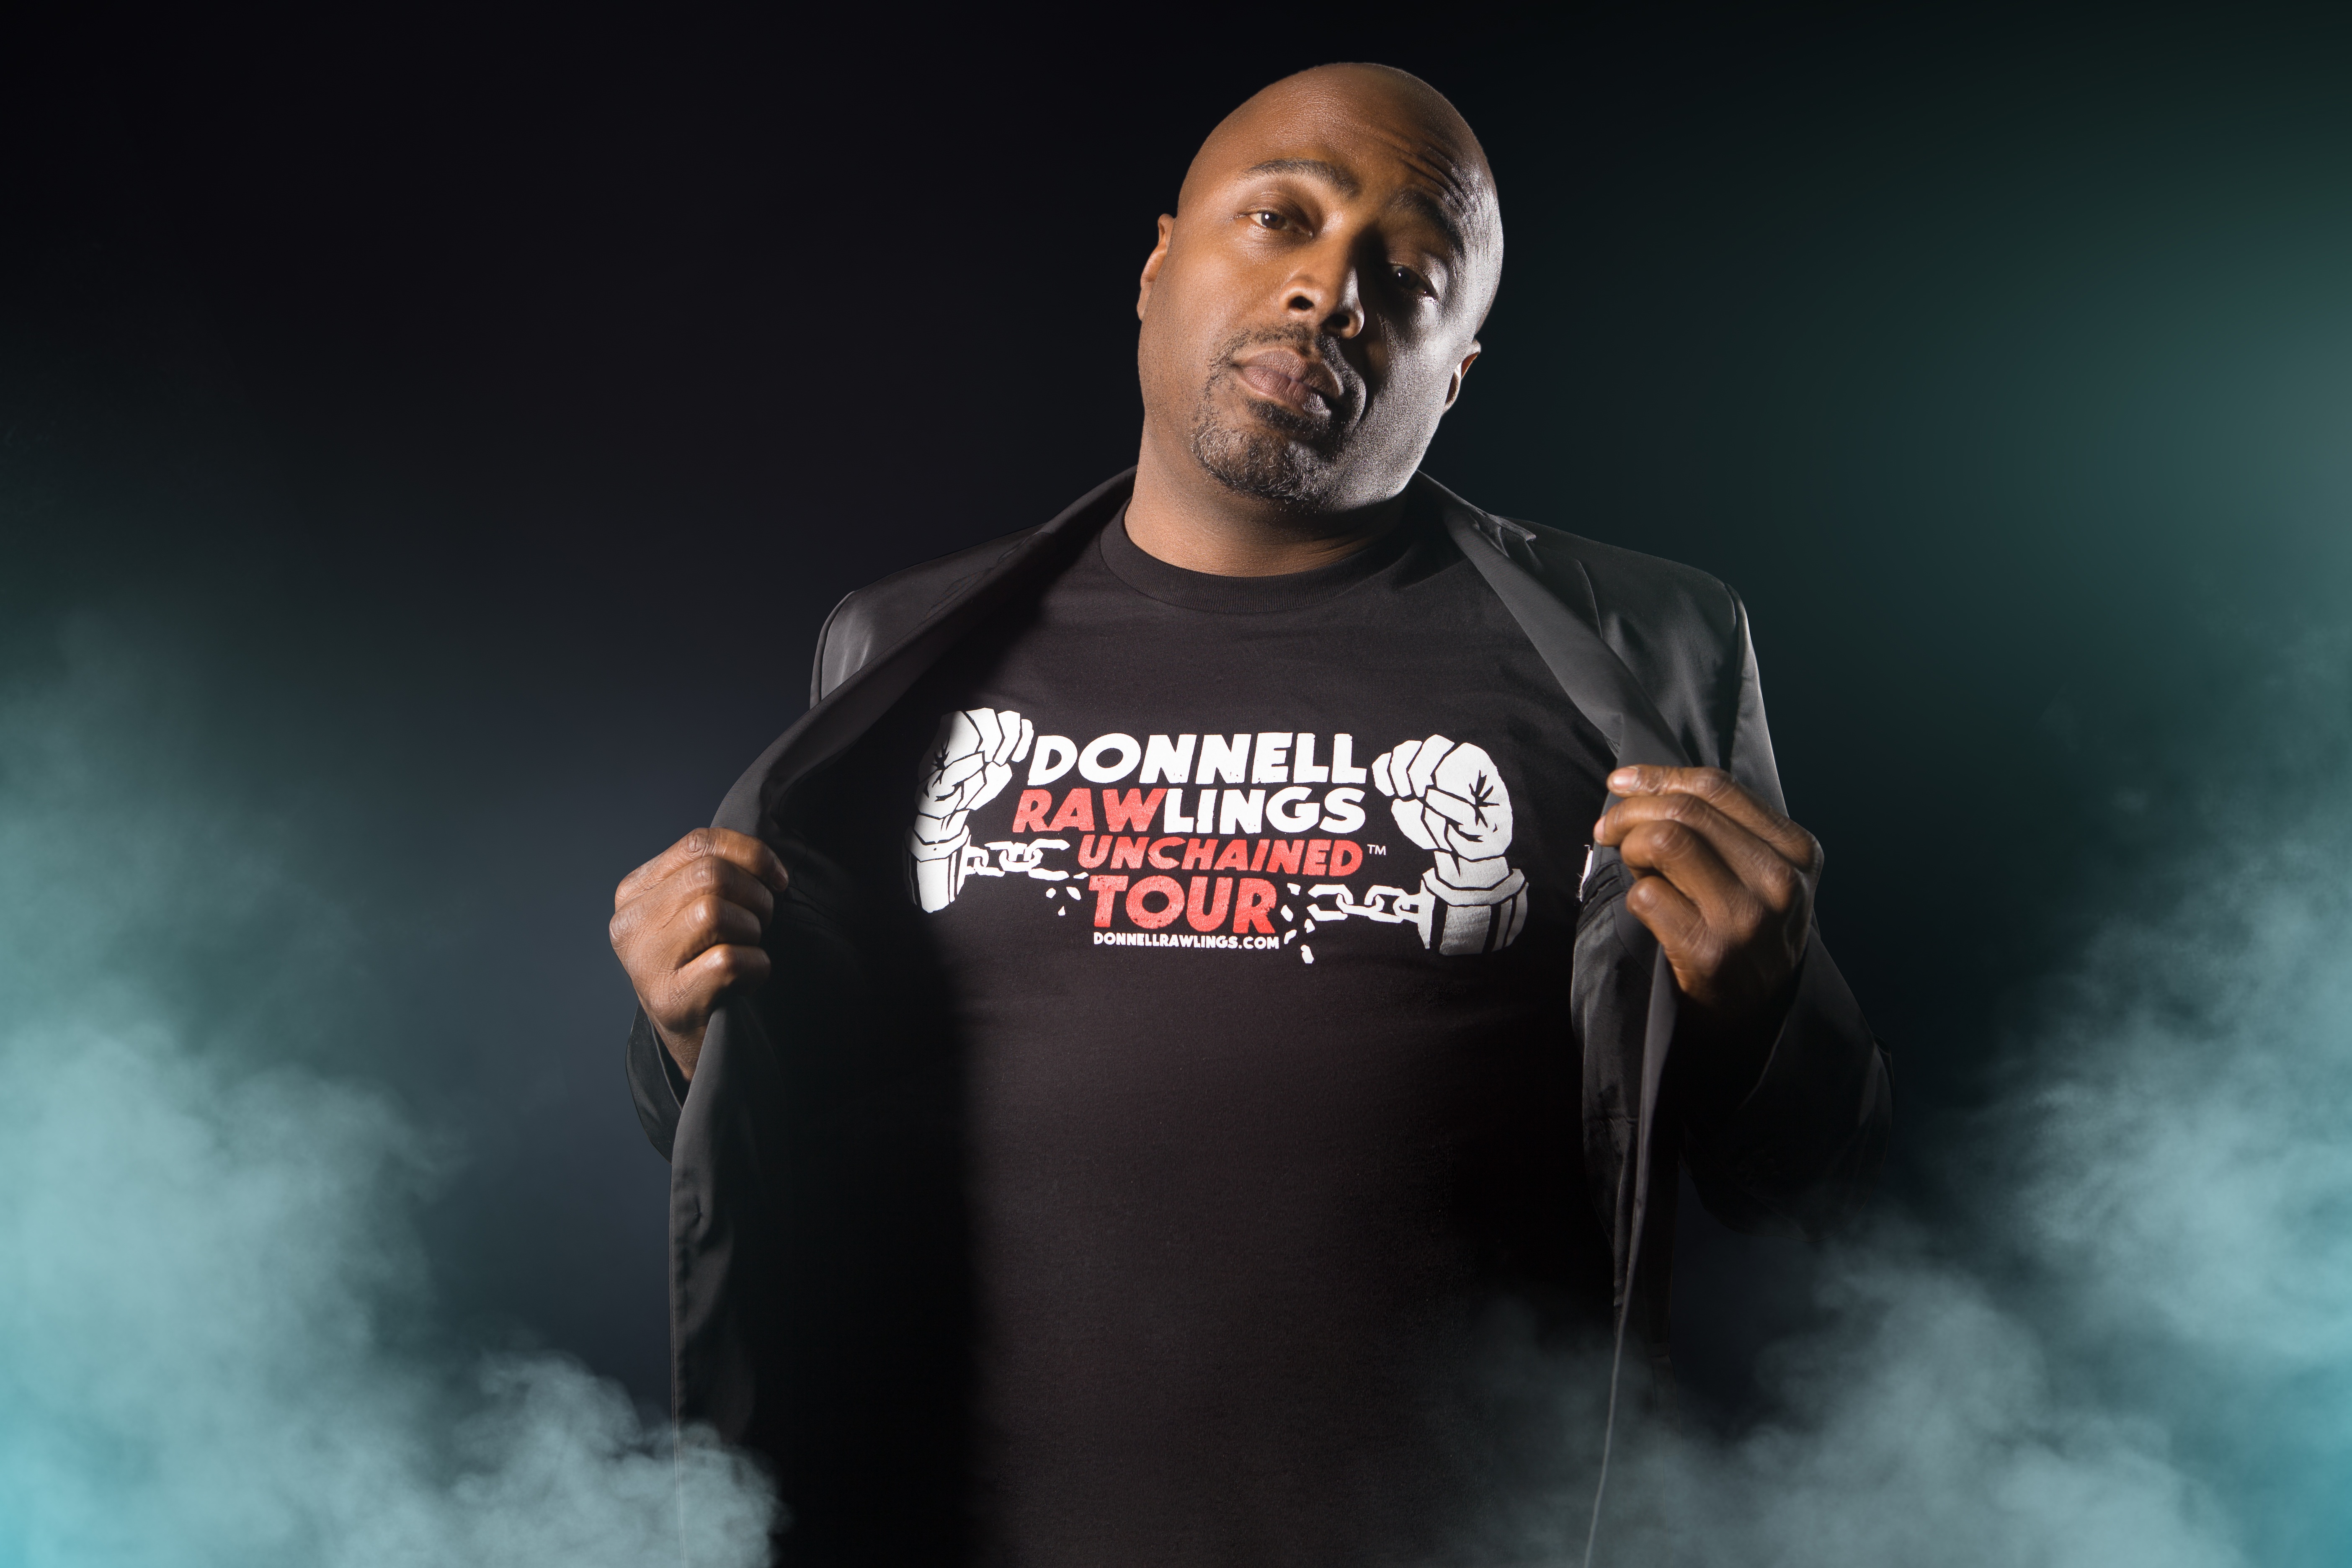 Comic Donnell Rawlings appears at the 2015 Hot 97 April Fools Comedy Show at the Theater at Madison Square Garden, Wed., April 1 at 8pm.